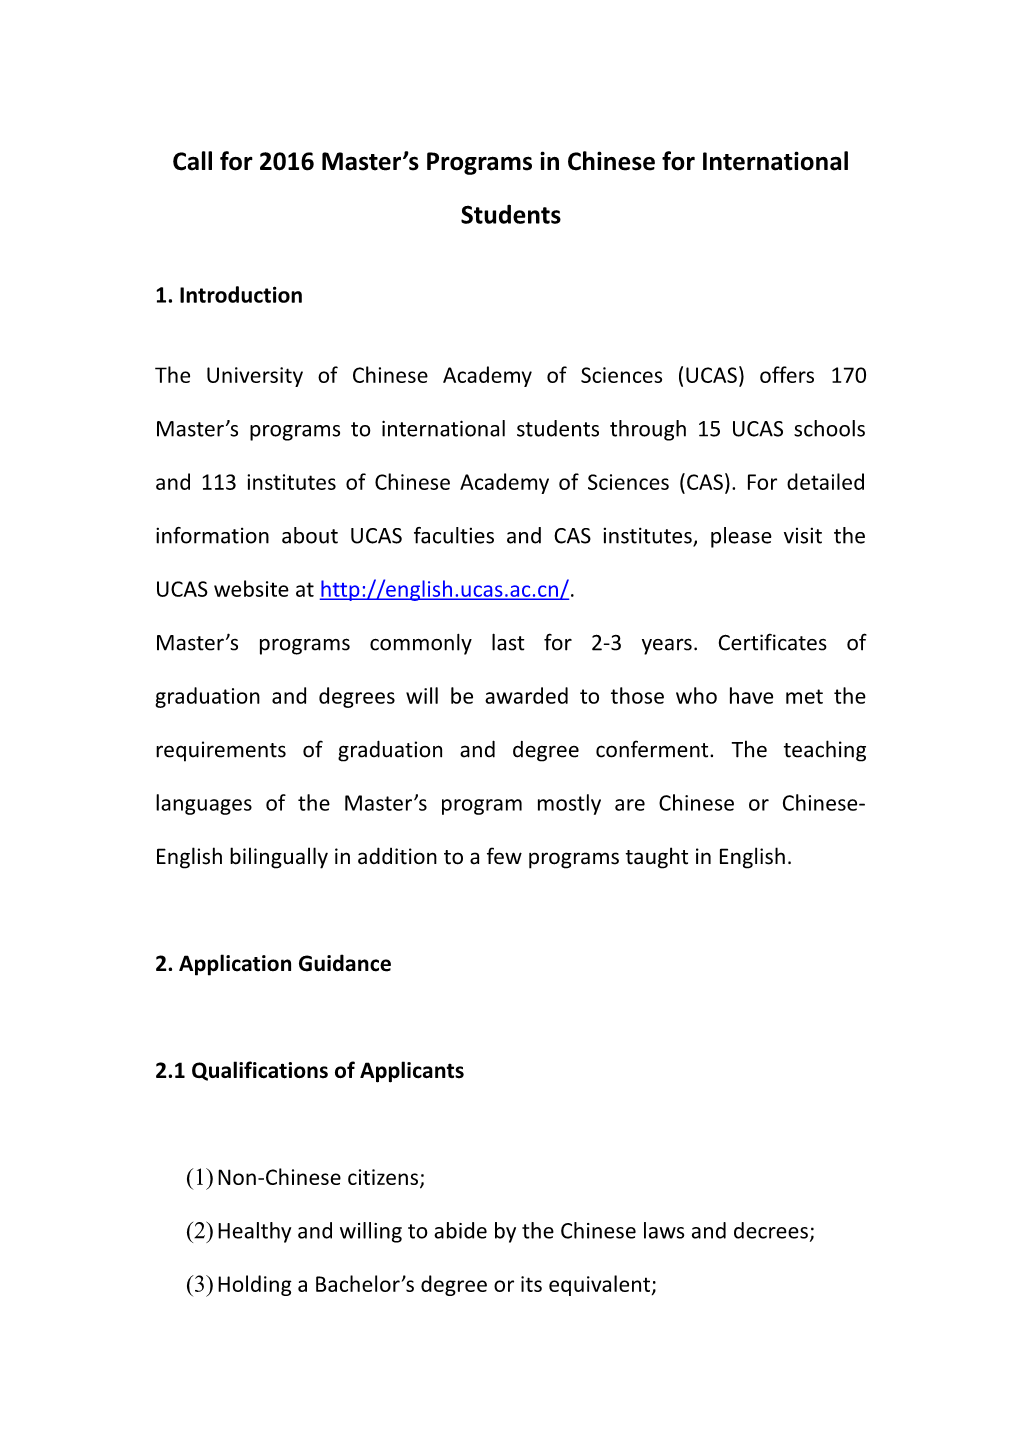 Call for 2016 Master S Programs in Chinese for International Students